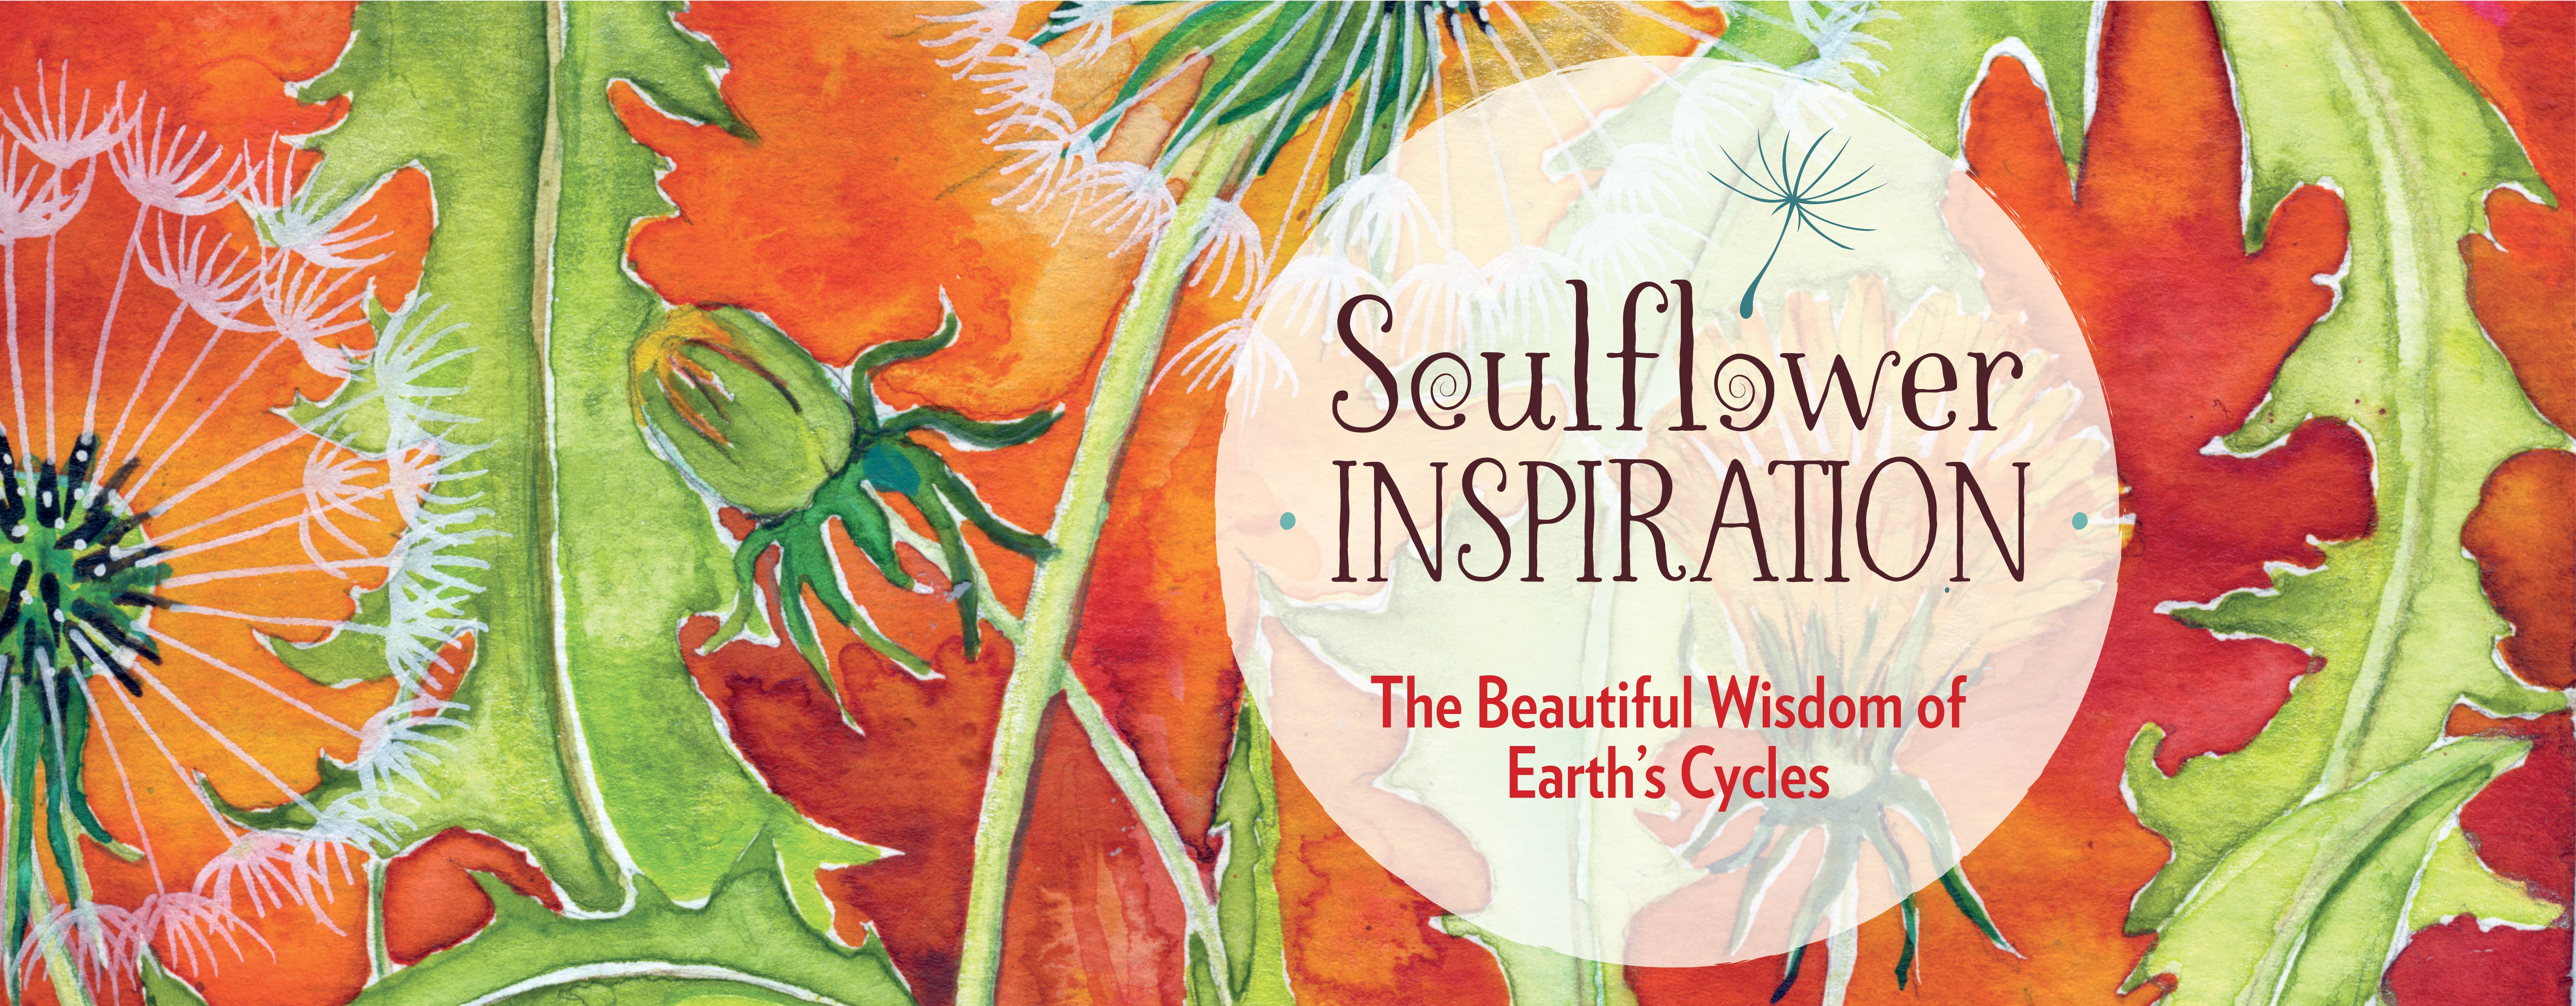 The Beautiful Wisdom of Earth's Cycles